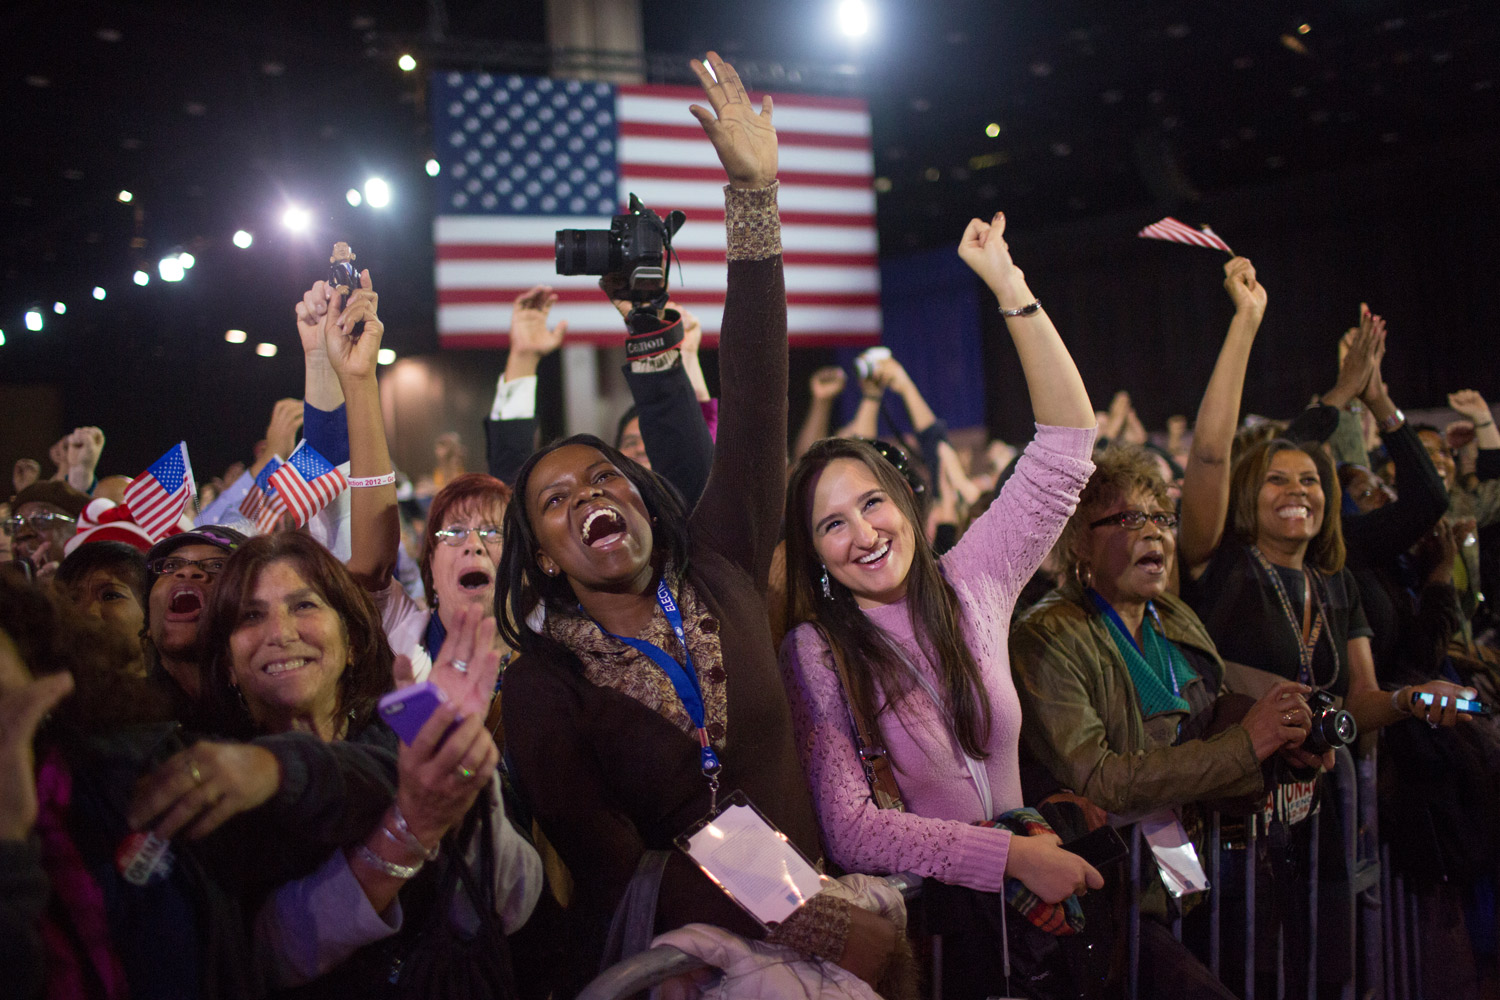 Image: Nov. 6, 2012. Supporters of U.S. President Barack Obama celebrate his victory at his election night rally in Chicago.